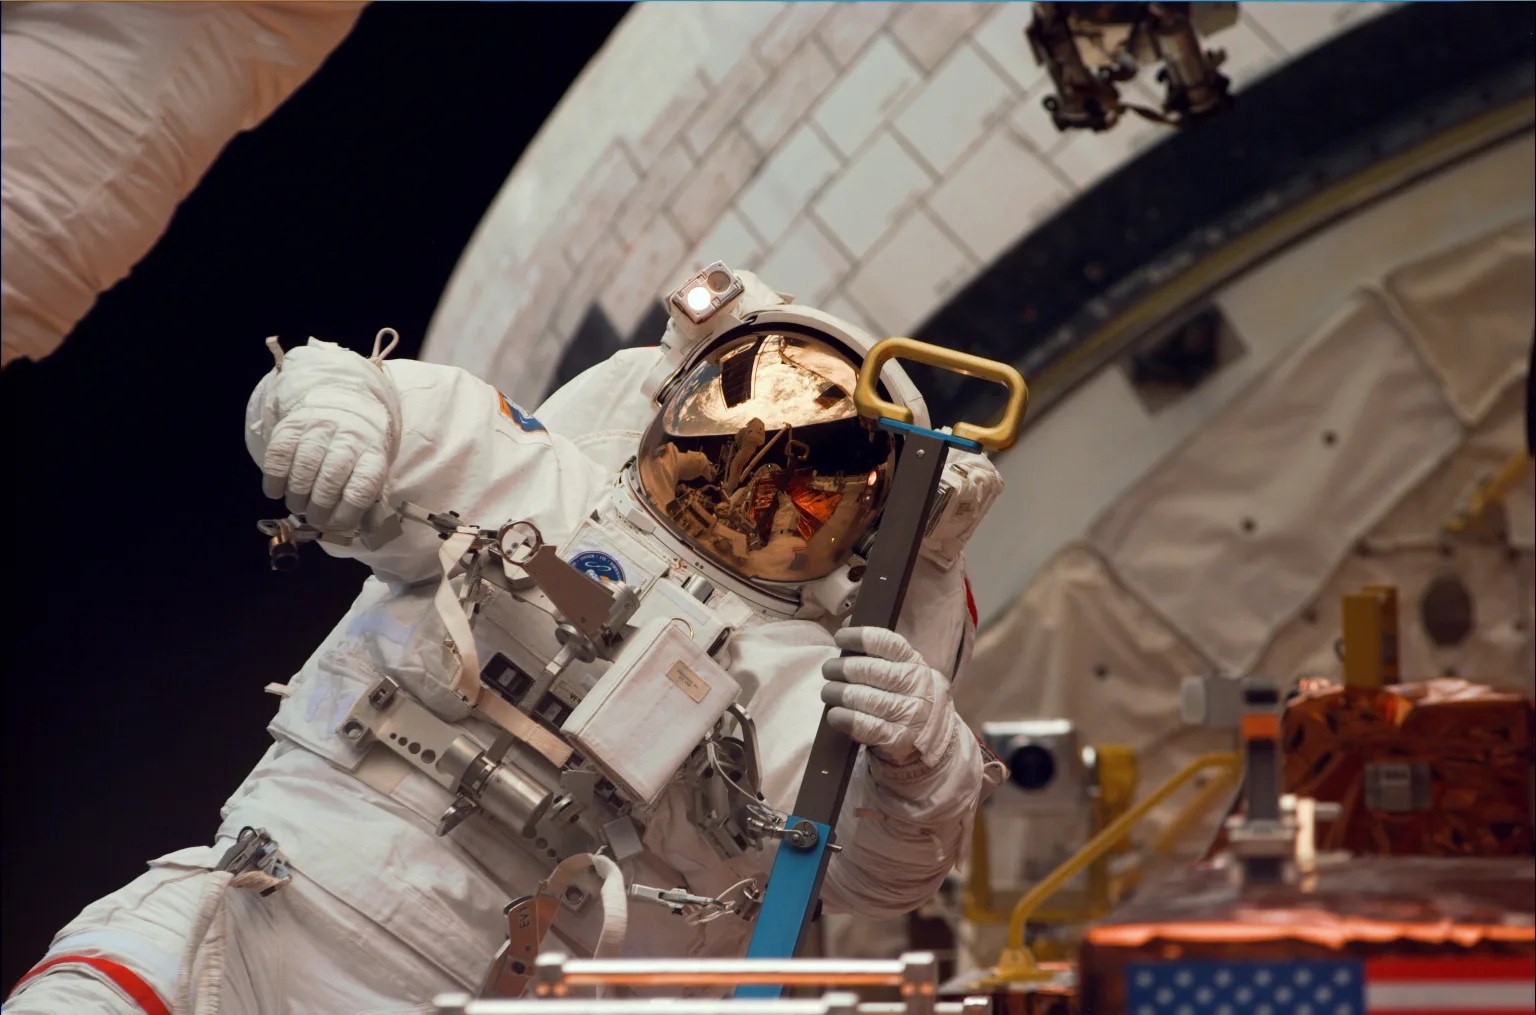 Astronaut in a white space suit in space doing maintenance on the Hubble Space Telescope with the shuttle Discovery's cargo bay door open.